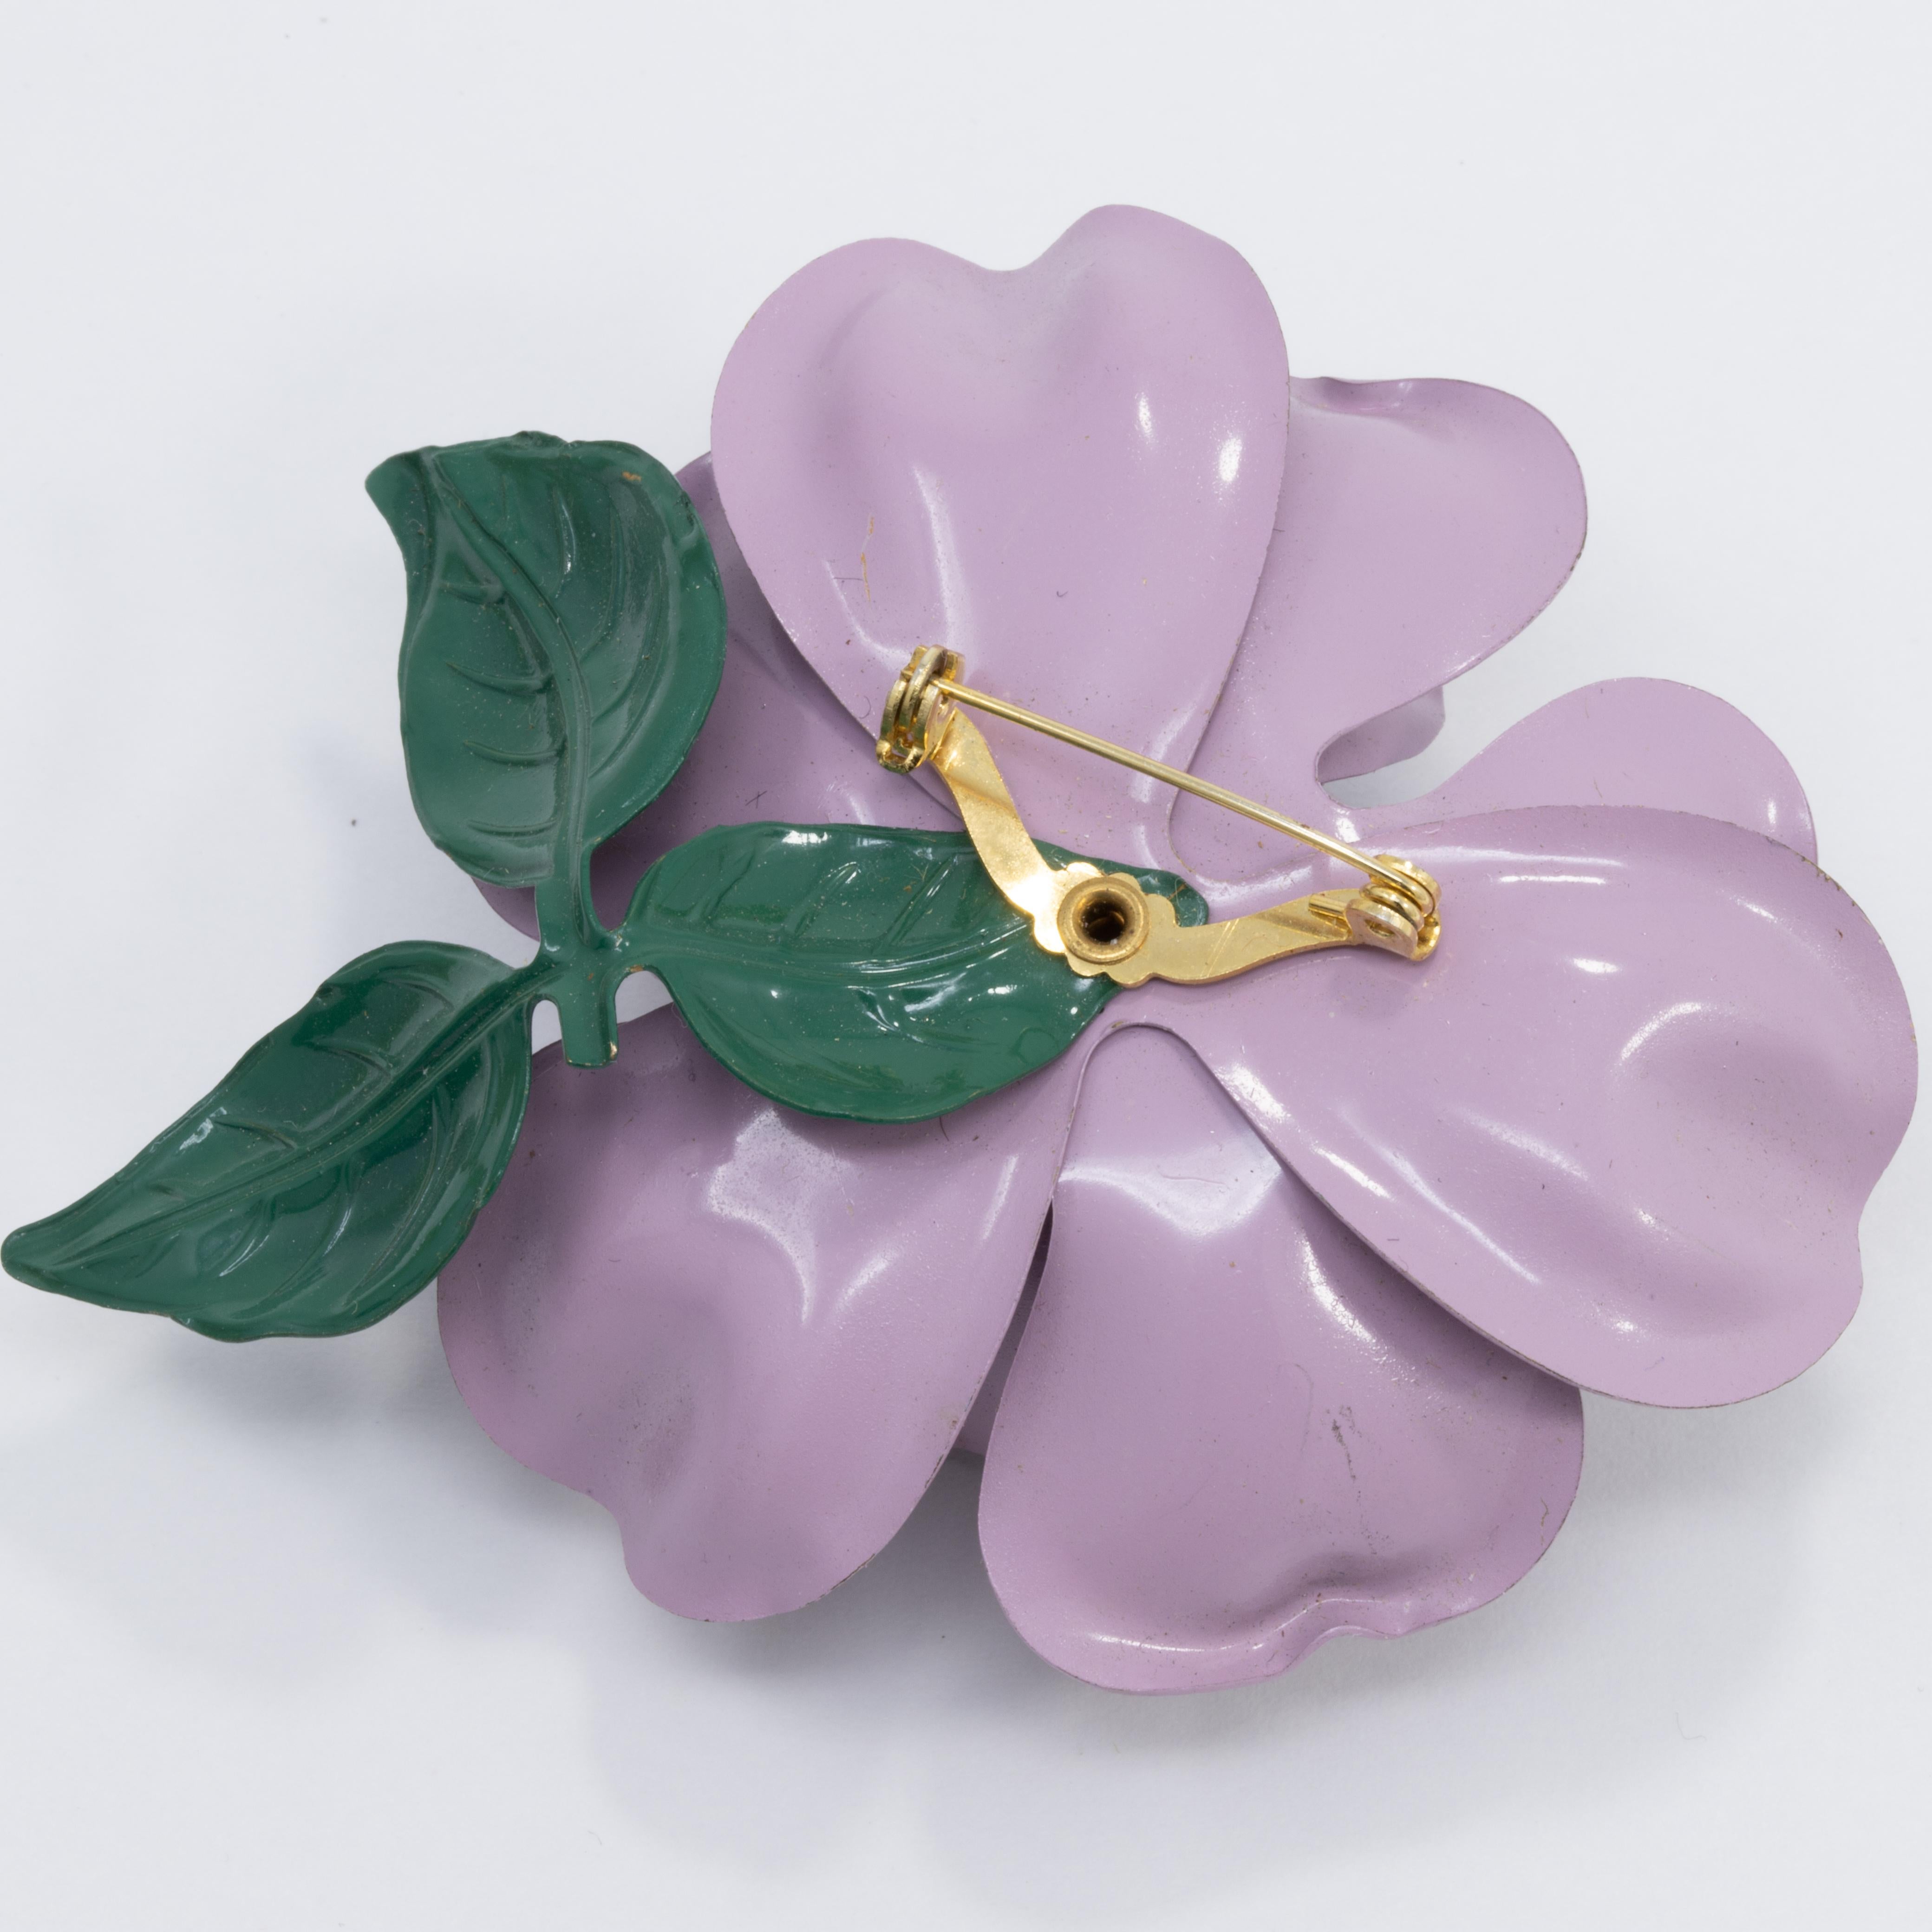 Retro Purple and Green Rose Oversized Pin Brooch in Gold In Excellent Condition For Sale In Milford, DE